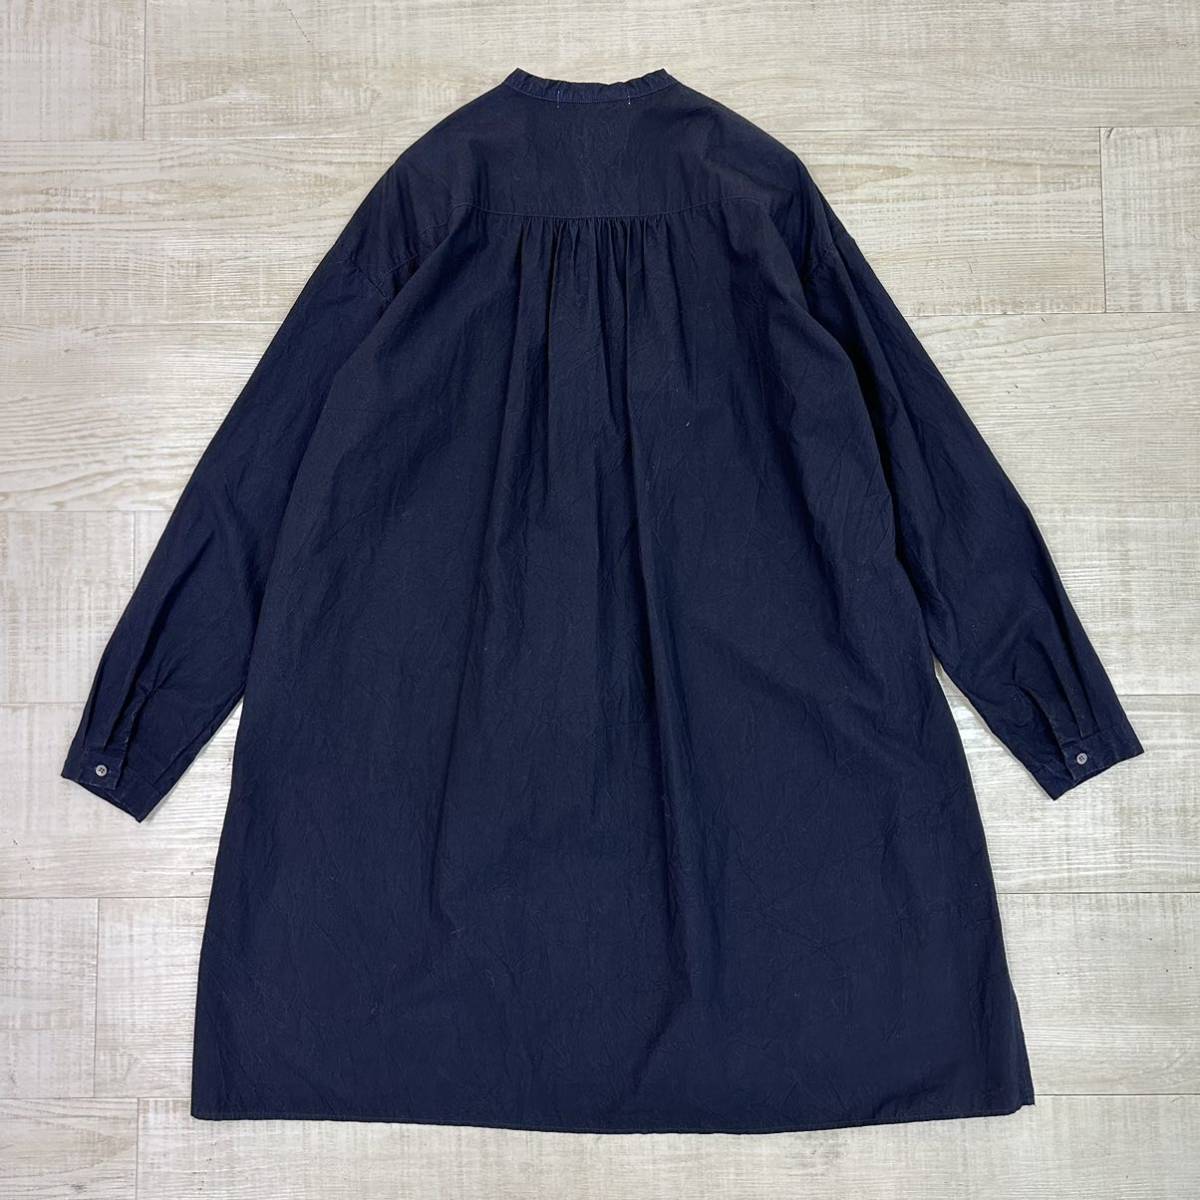 19ss 2019 Veritecoeurvelite cool wrinkle processing pull over shirt tunic One-piece made in Japan navy series size FREE